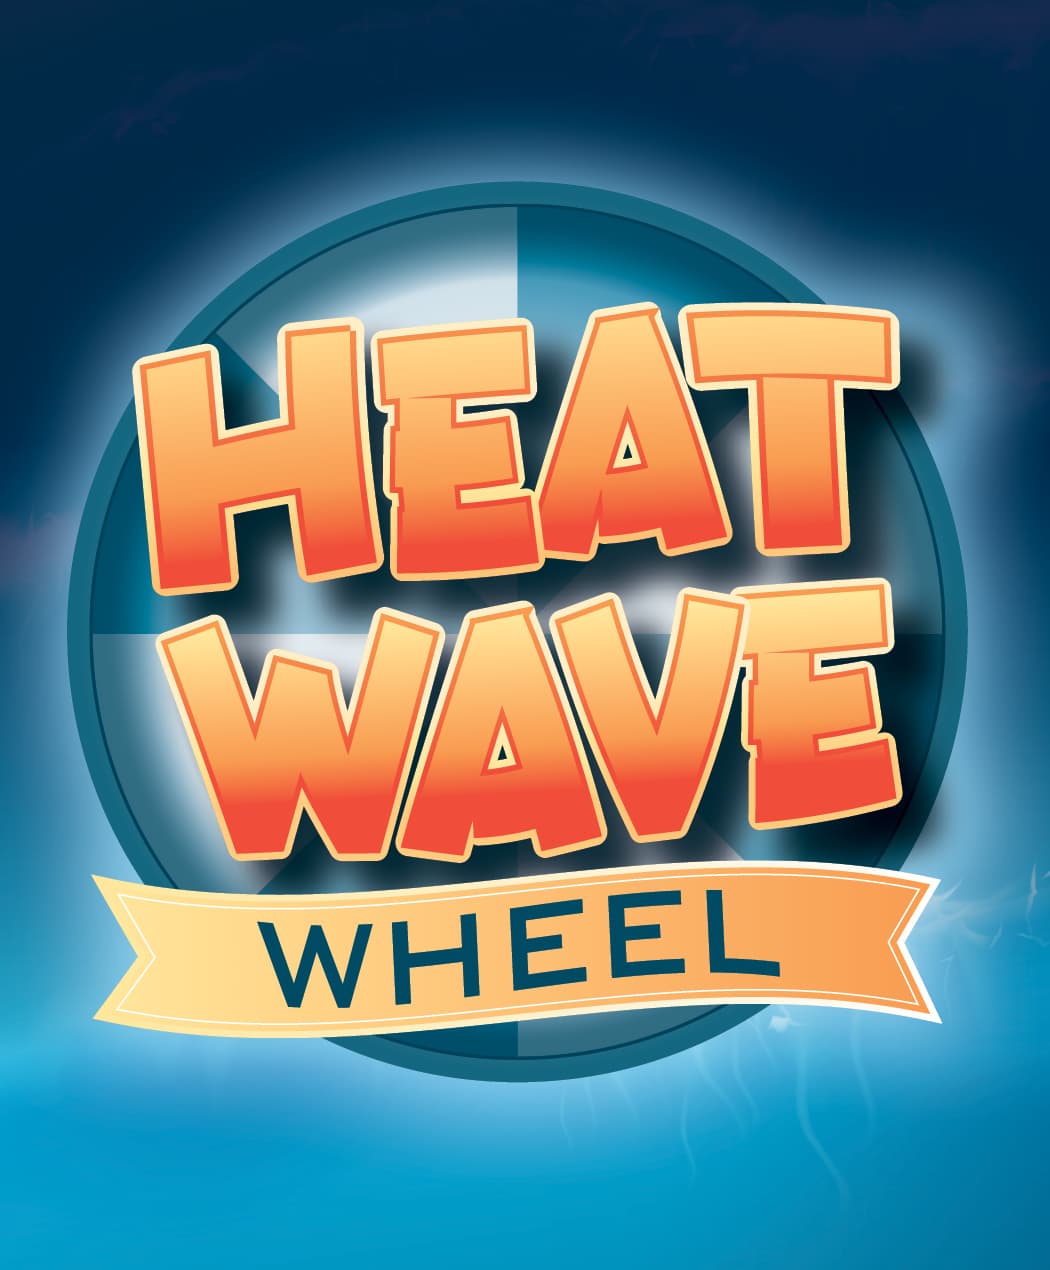 Heat Wave Wheel Promotion at the Lake House